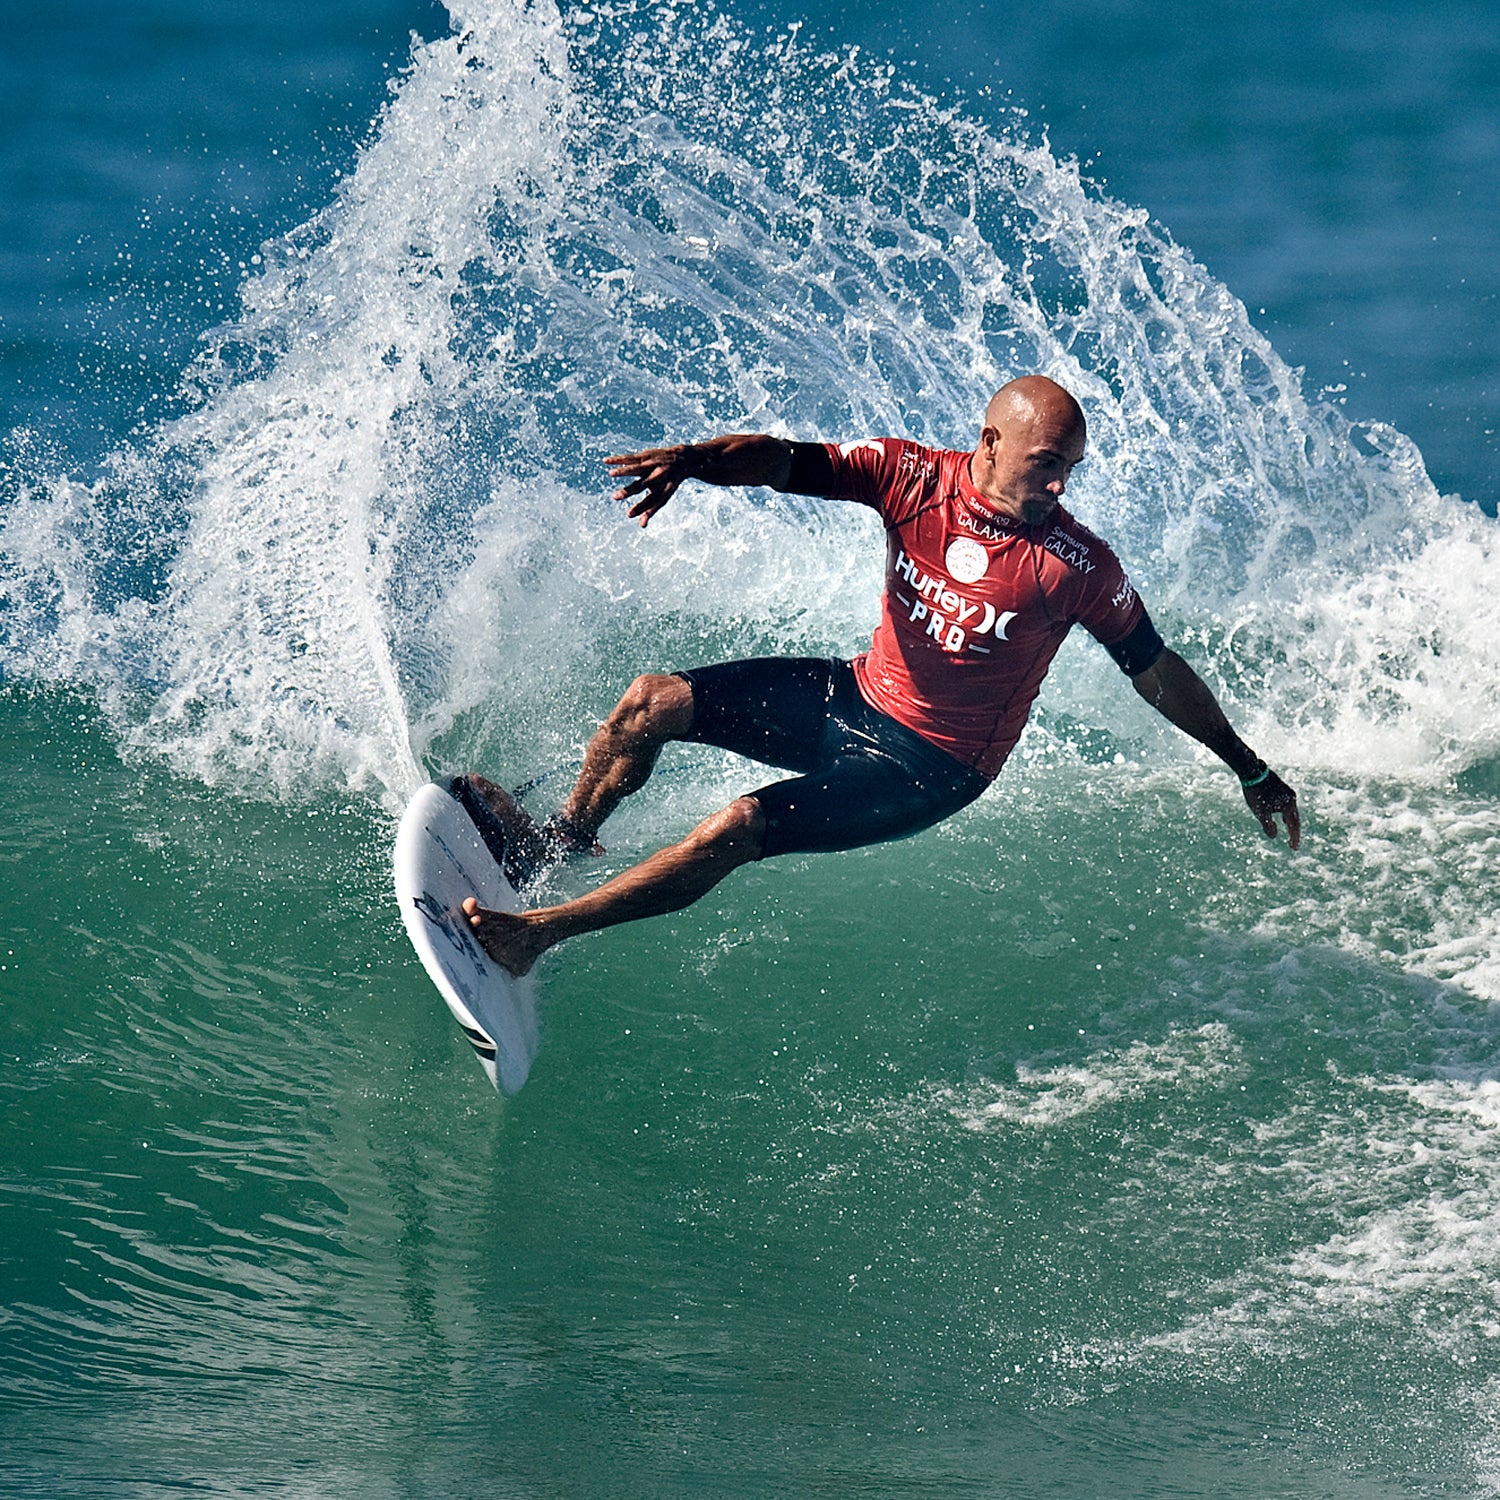 Olympic surfing: Can the exclusive sport become accessible?